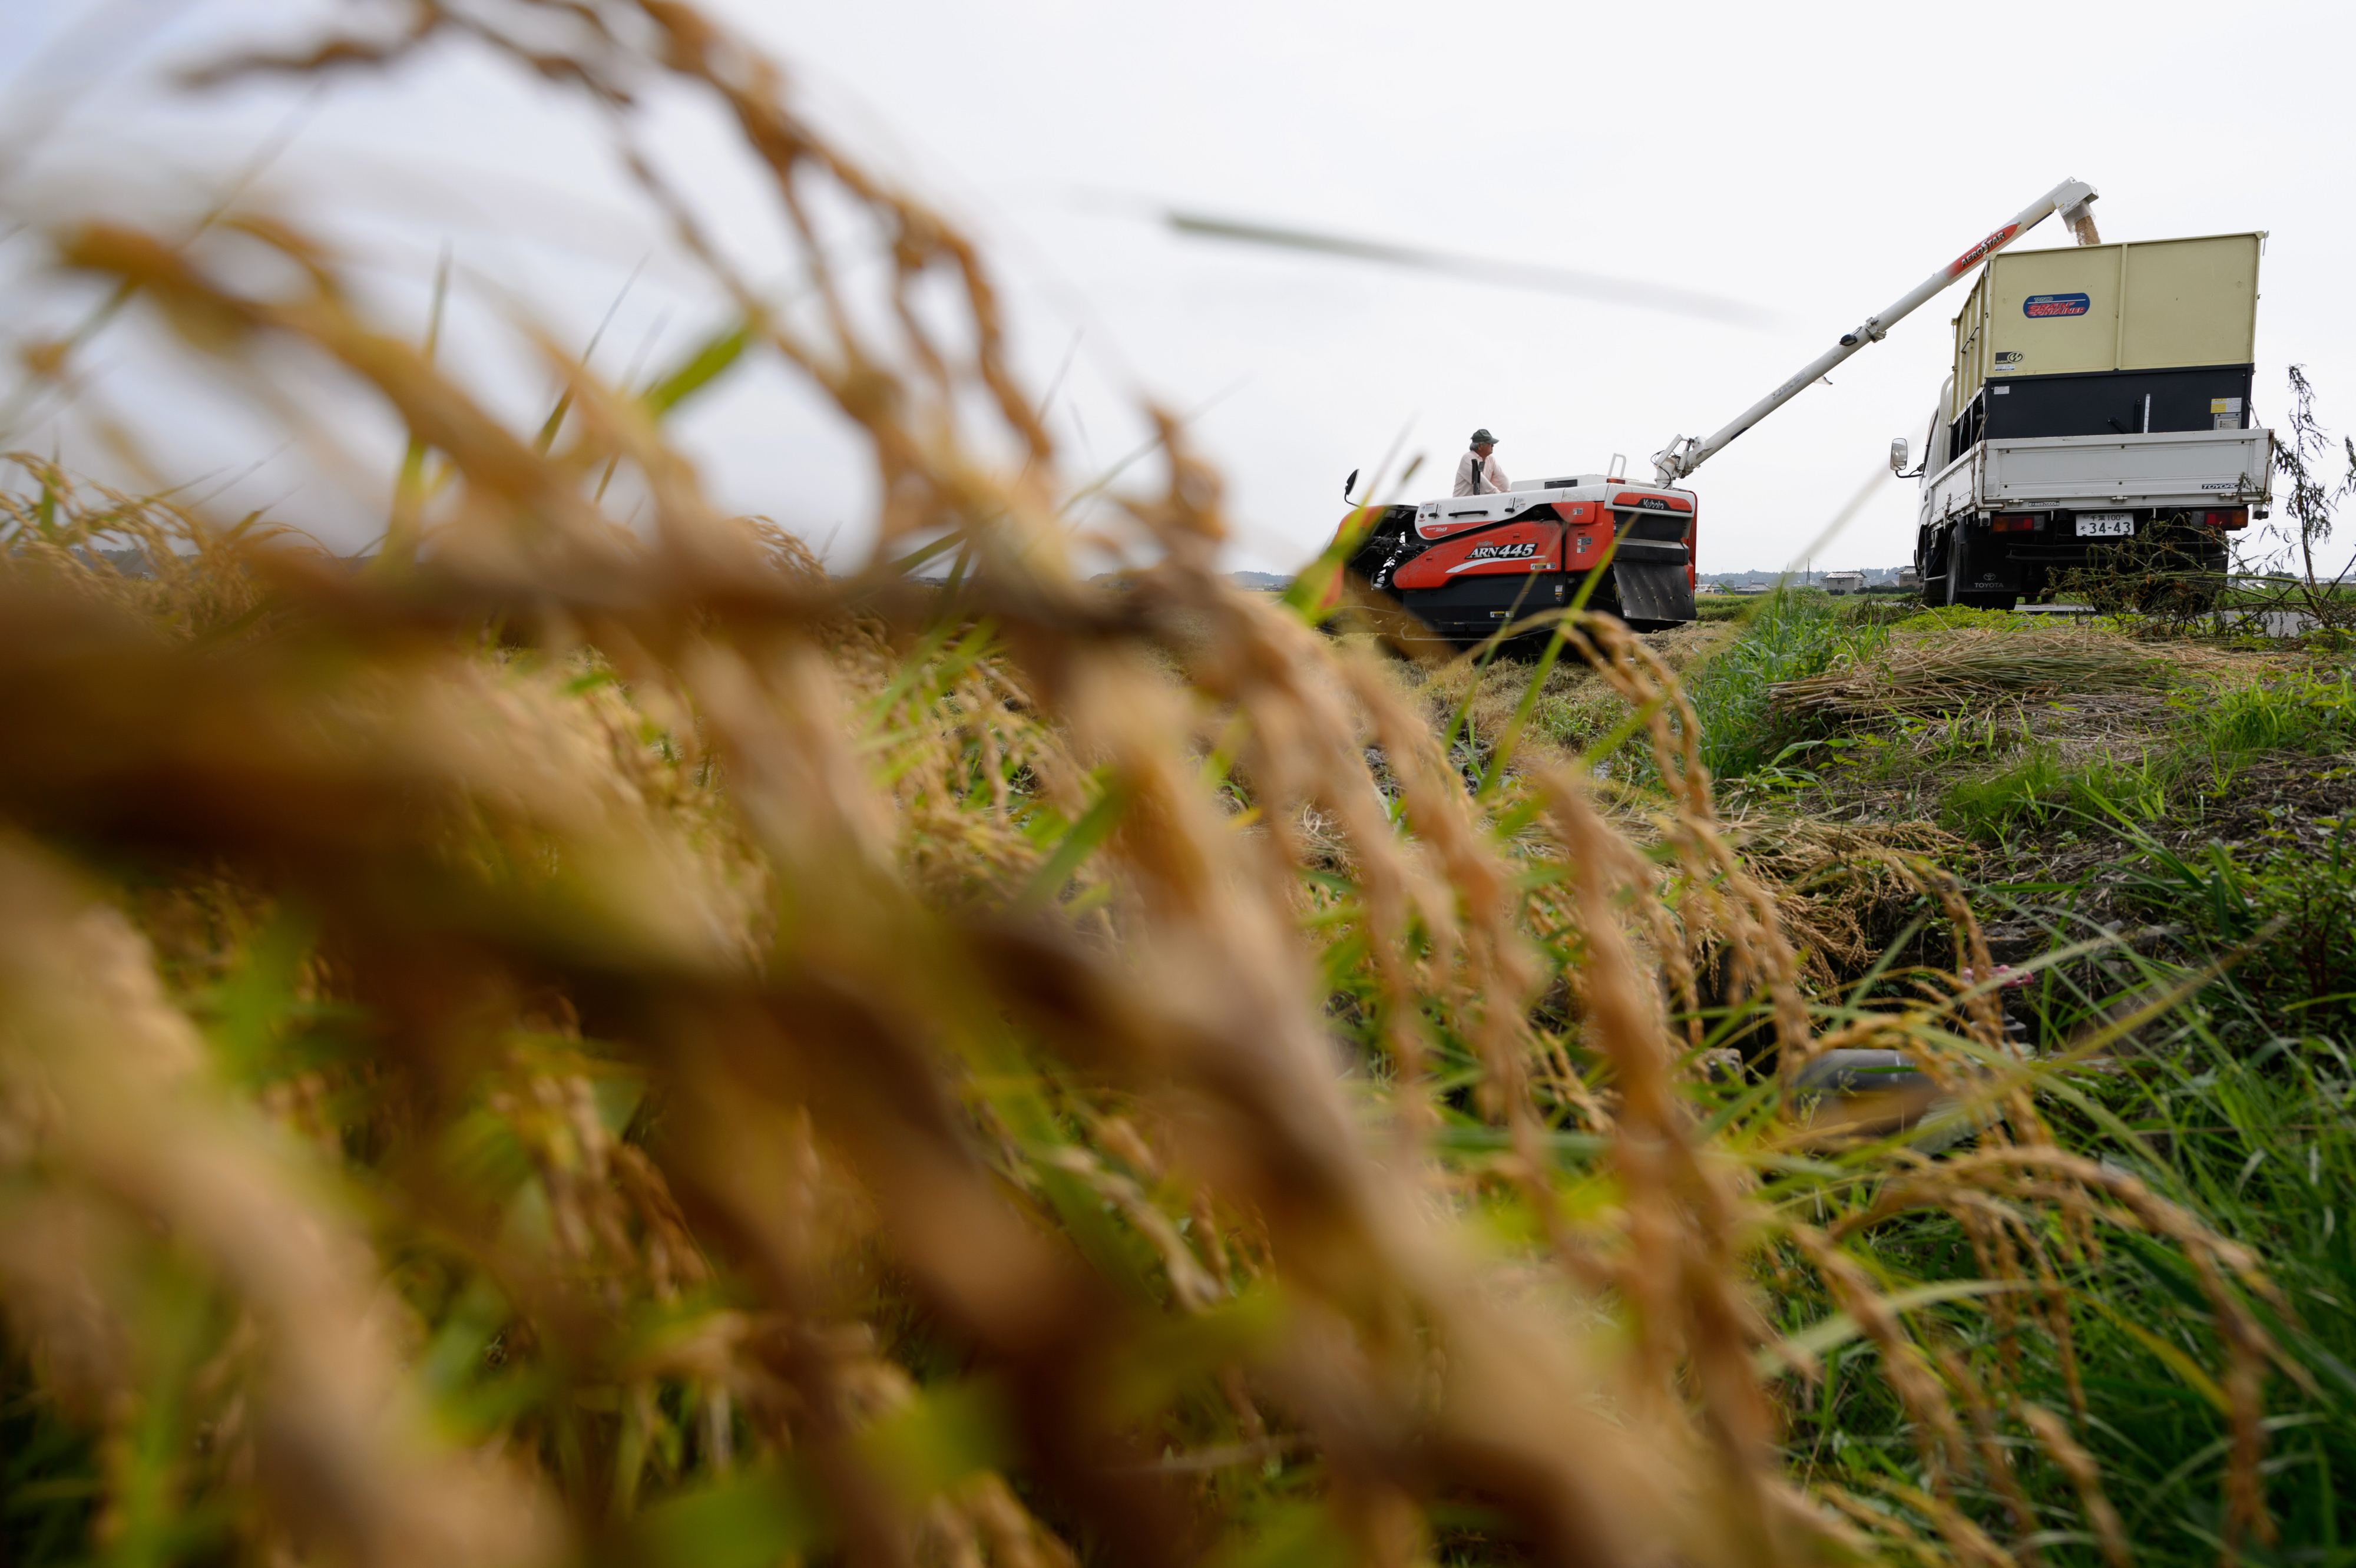 The number of foreigners working illegally on farms in Japan increased threefold over the three-year period ending in 2015. | BLOOMBERG